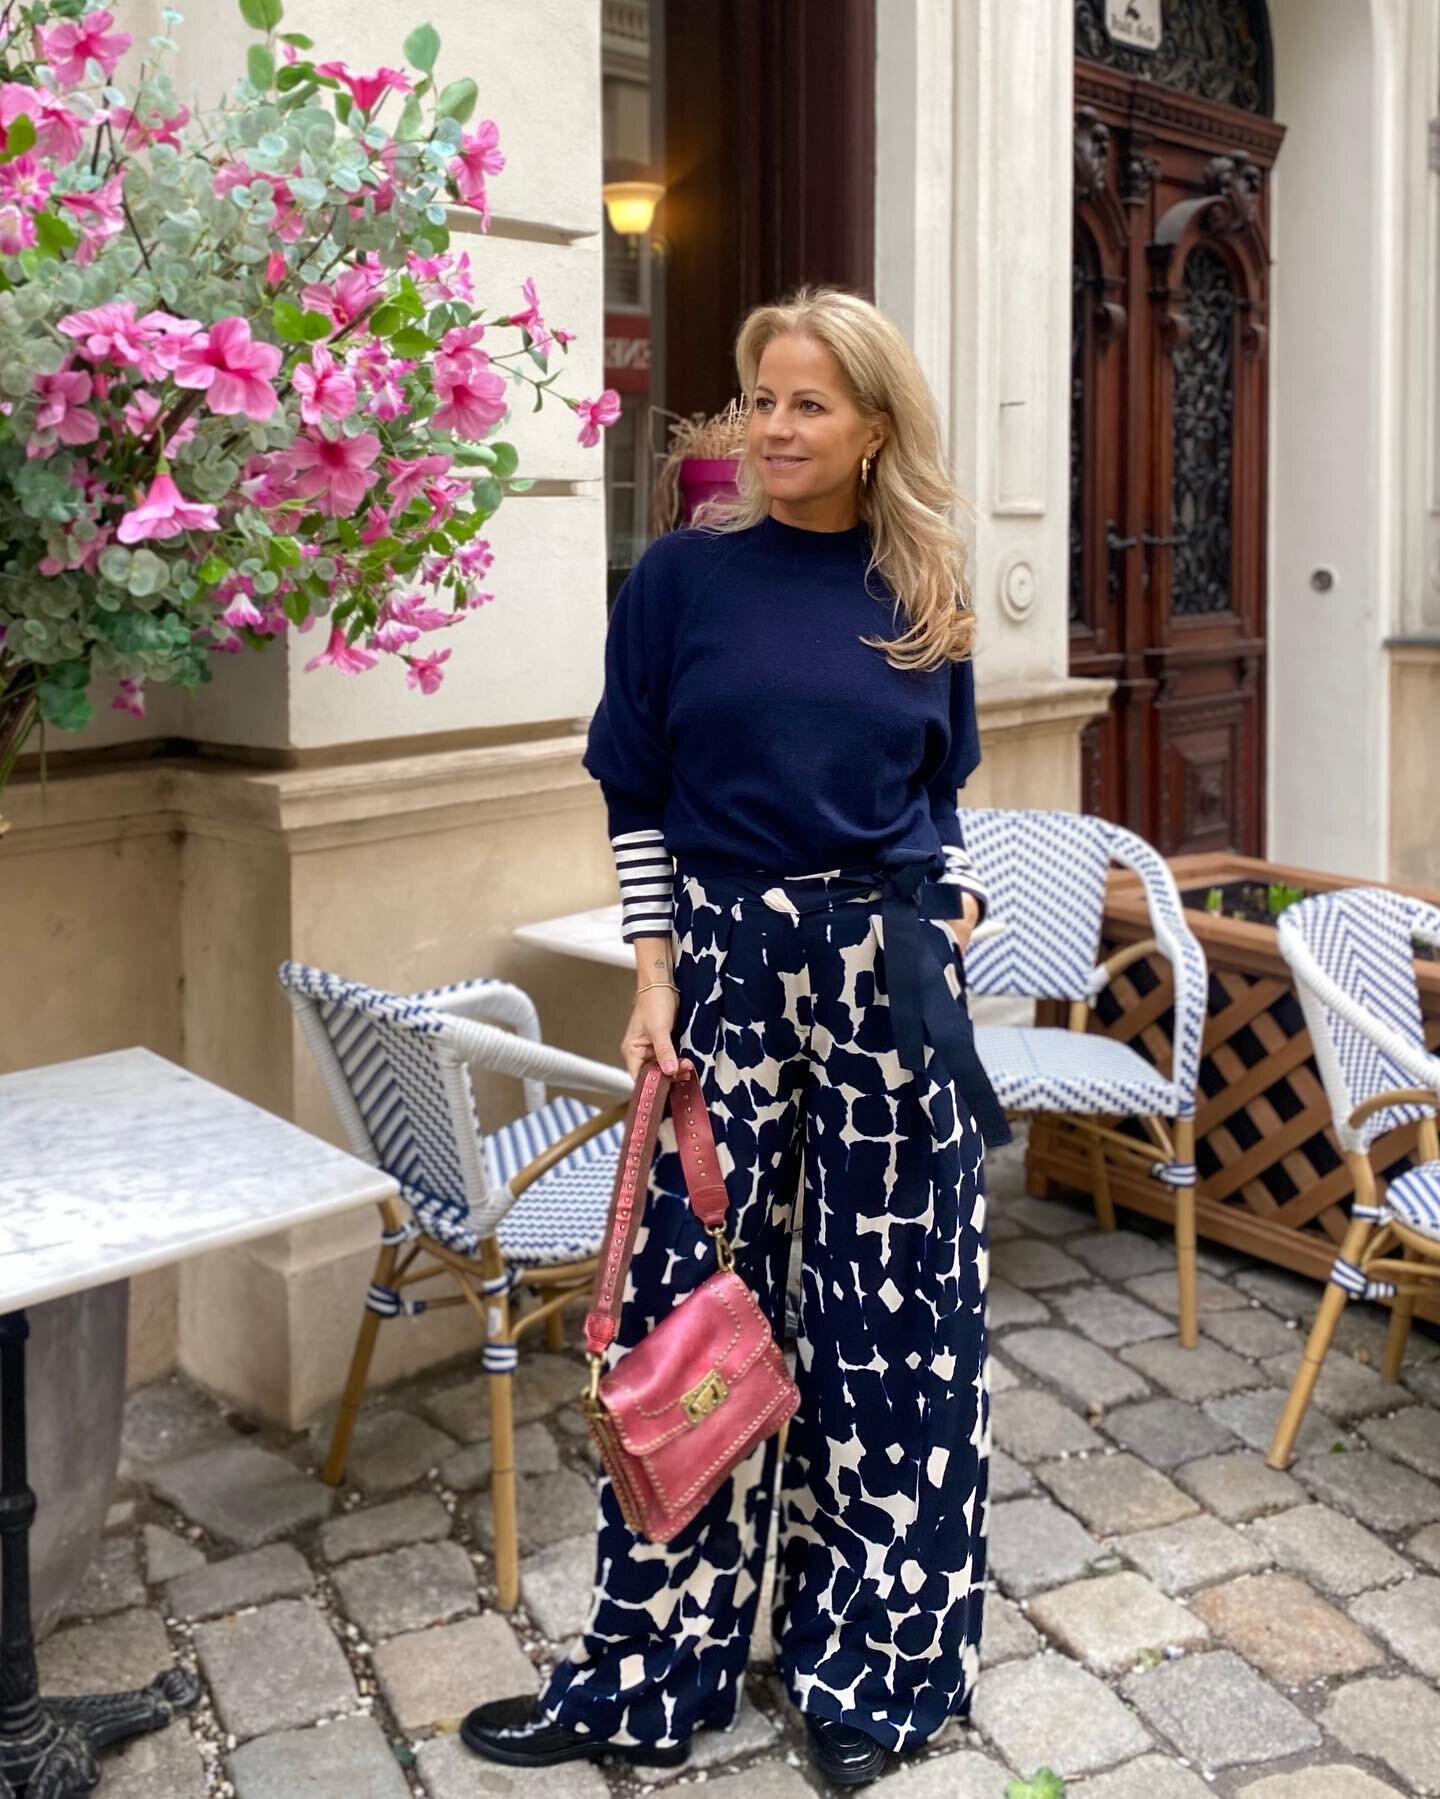 Spring&rsquo;24 is almost here!🥳🌸

Get some inspiration from Spodd. Our new pink leather bag, wide-leg trousers with belt bow (by the way,bow trend is still with us🎀) and pullovers. 

Total outfit is available in store💗

#pinkbag #viennafashion #